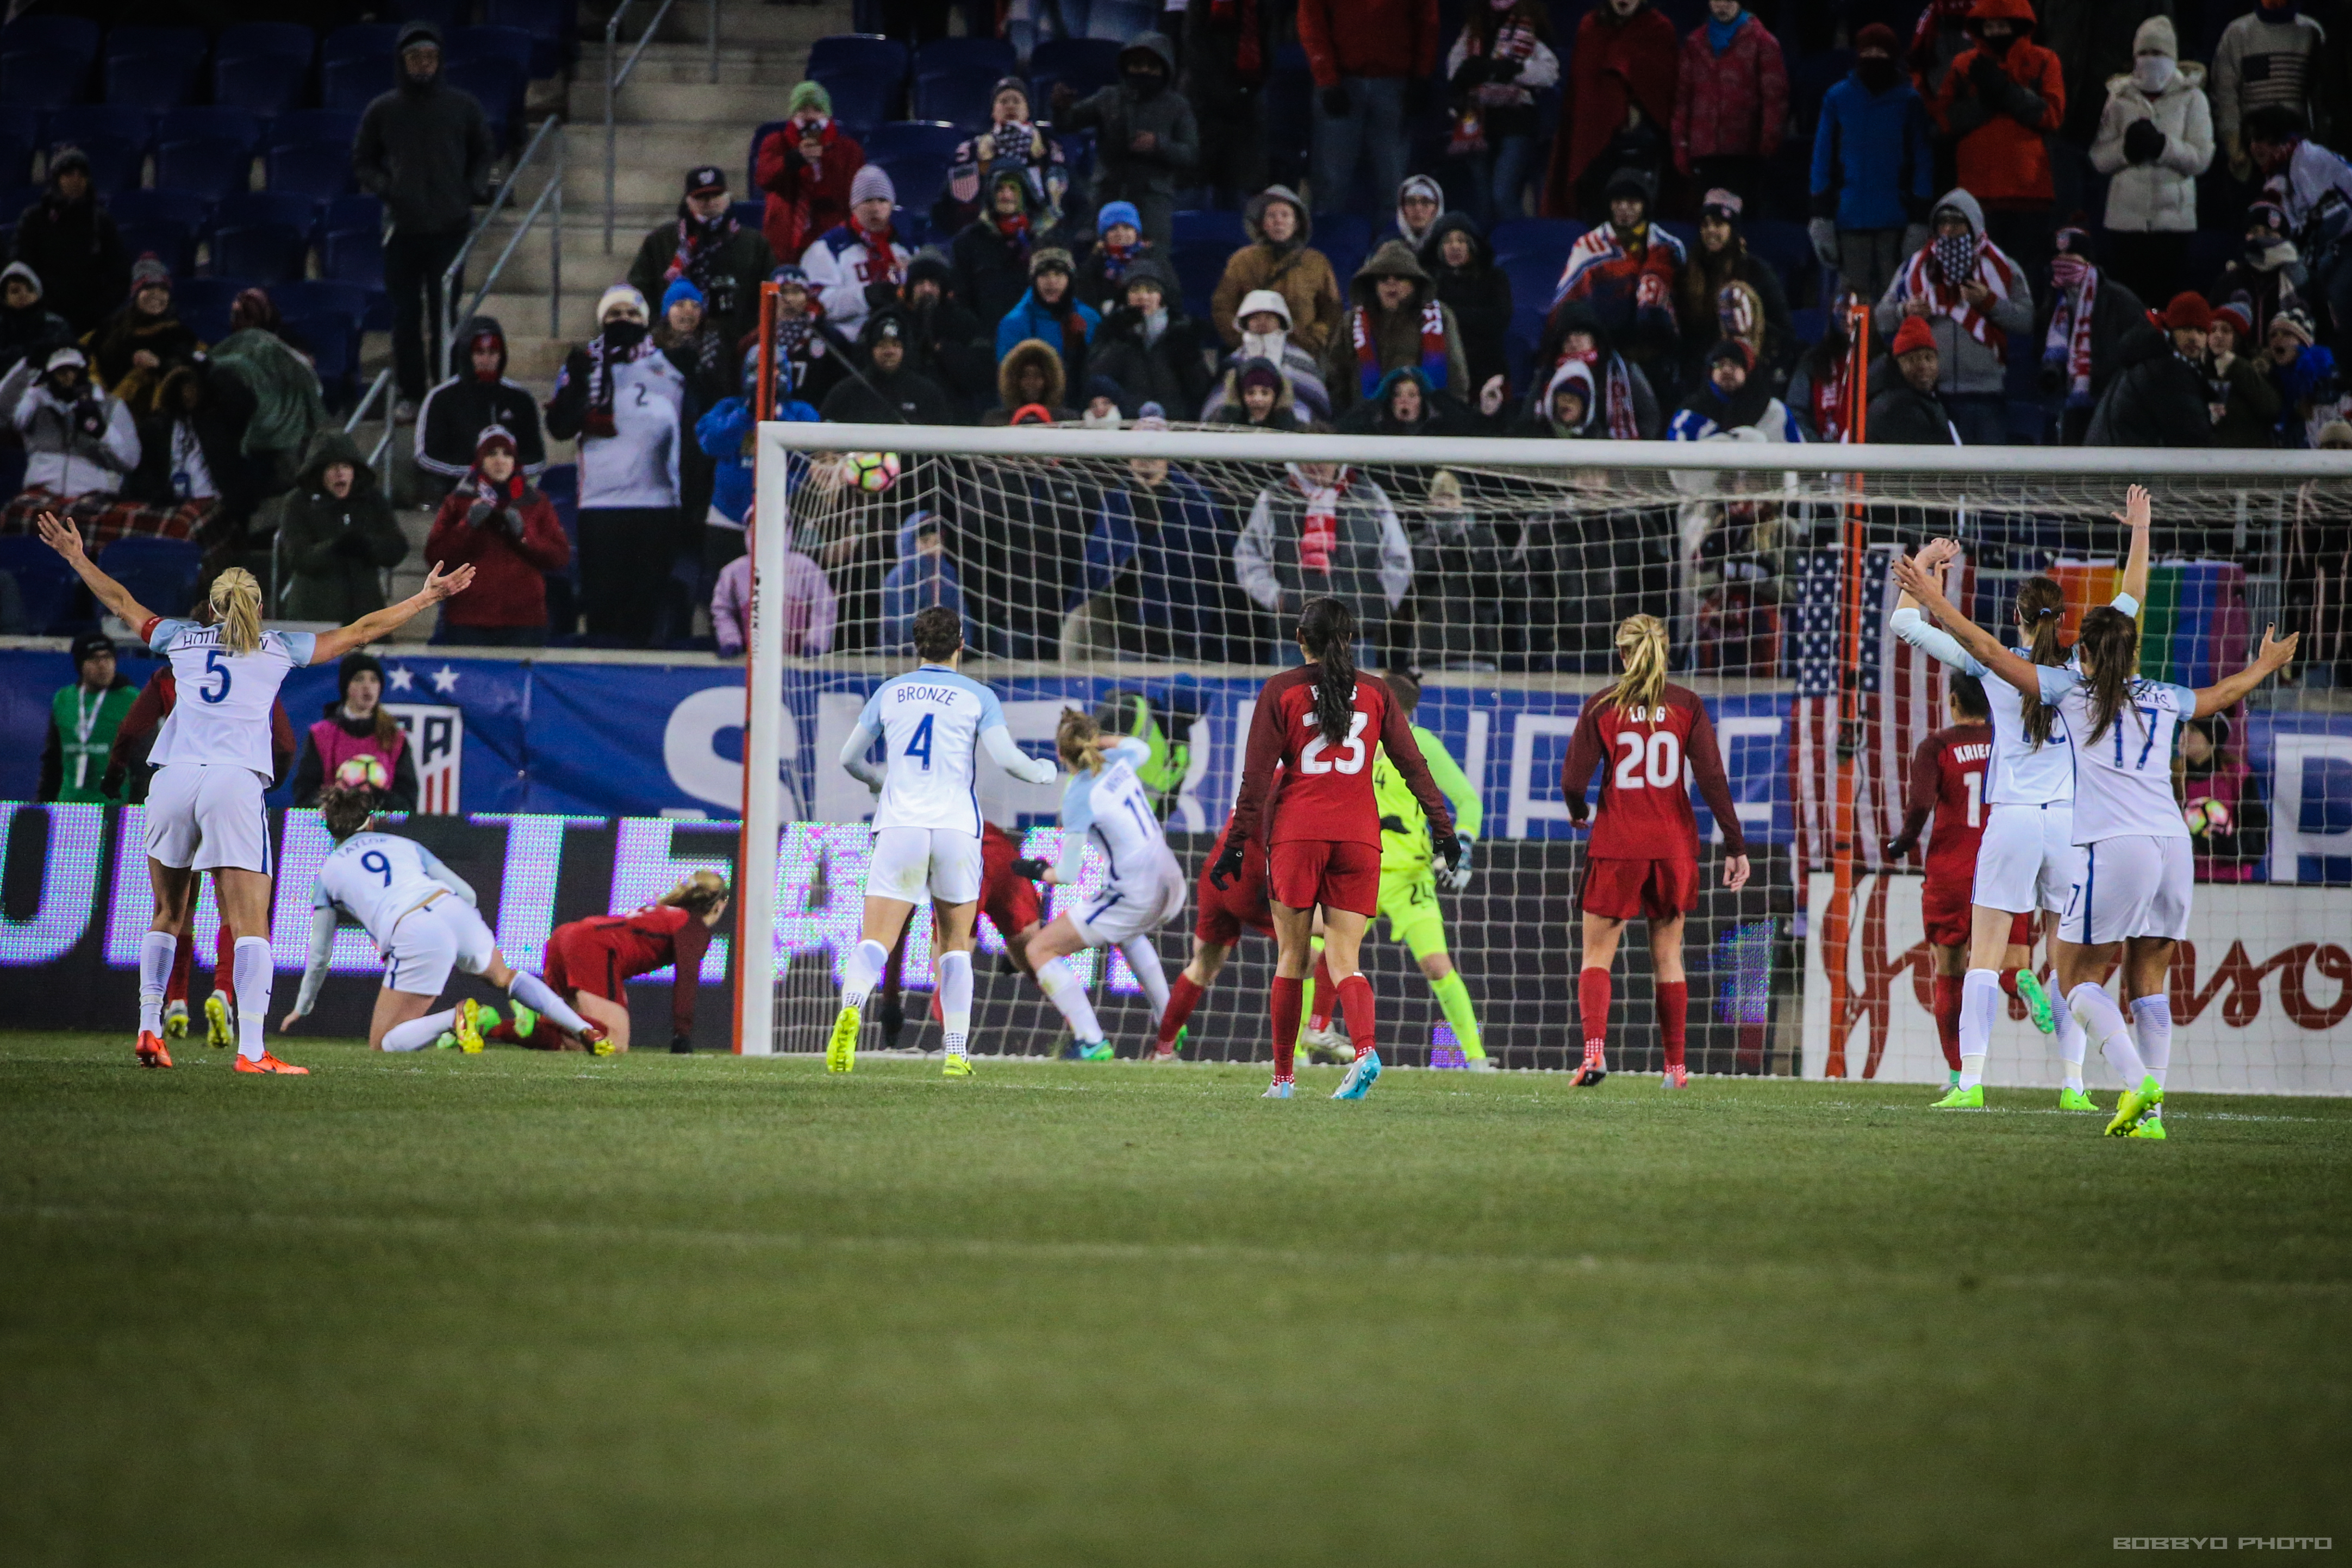 England Goes up 1-0 in the 89th Minute. Photo (Bobby O'Hara/ PureSportsNY)